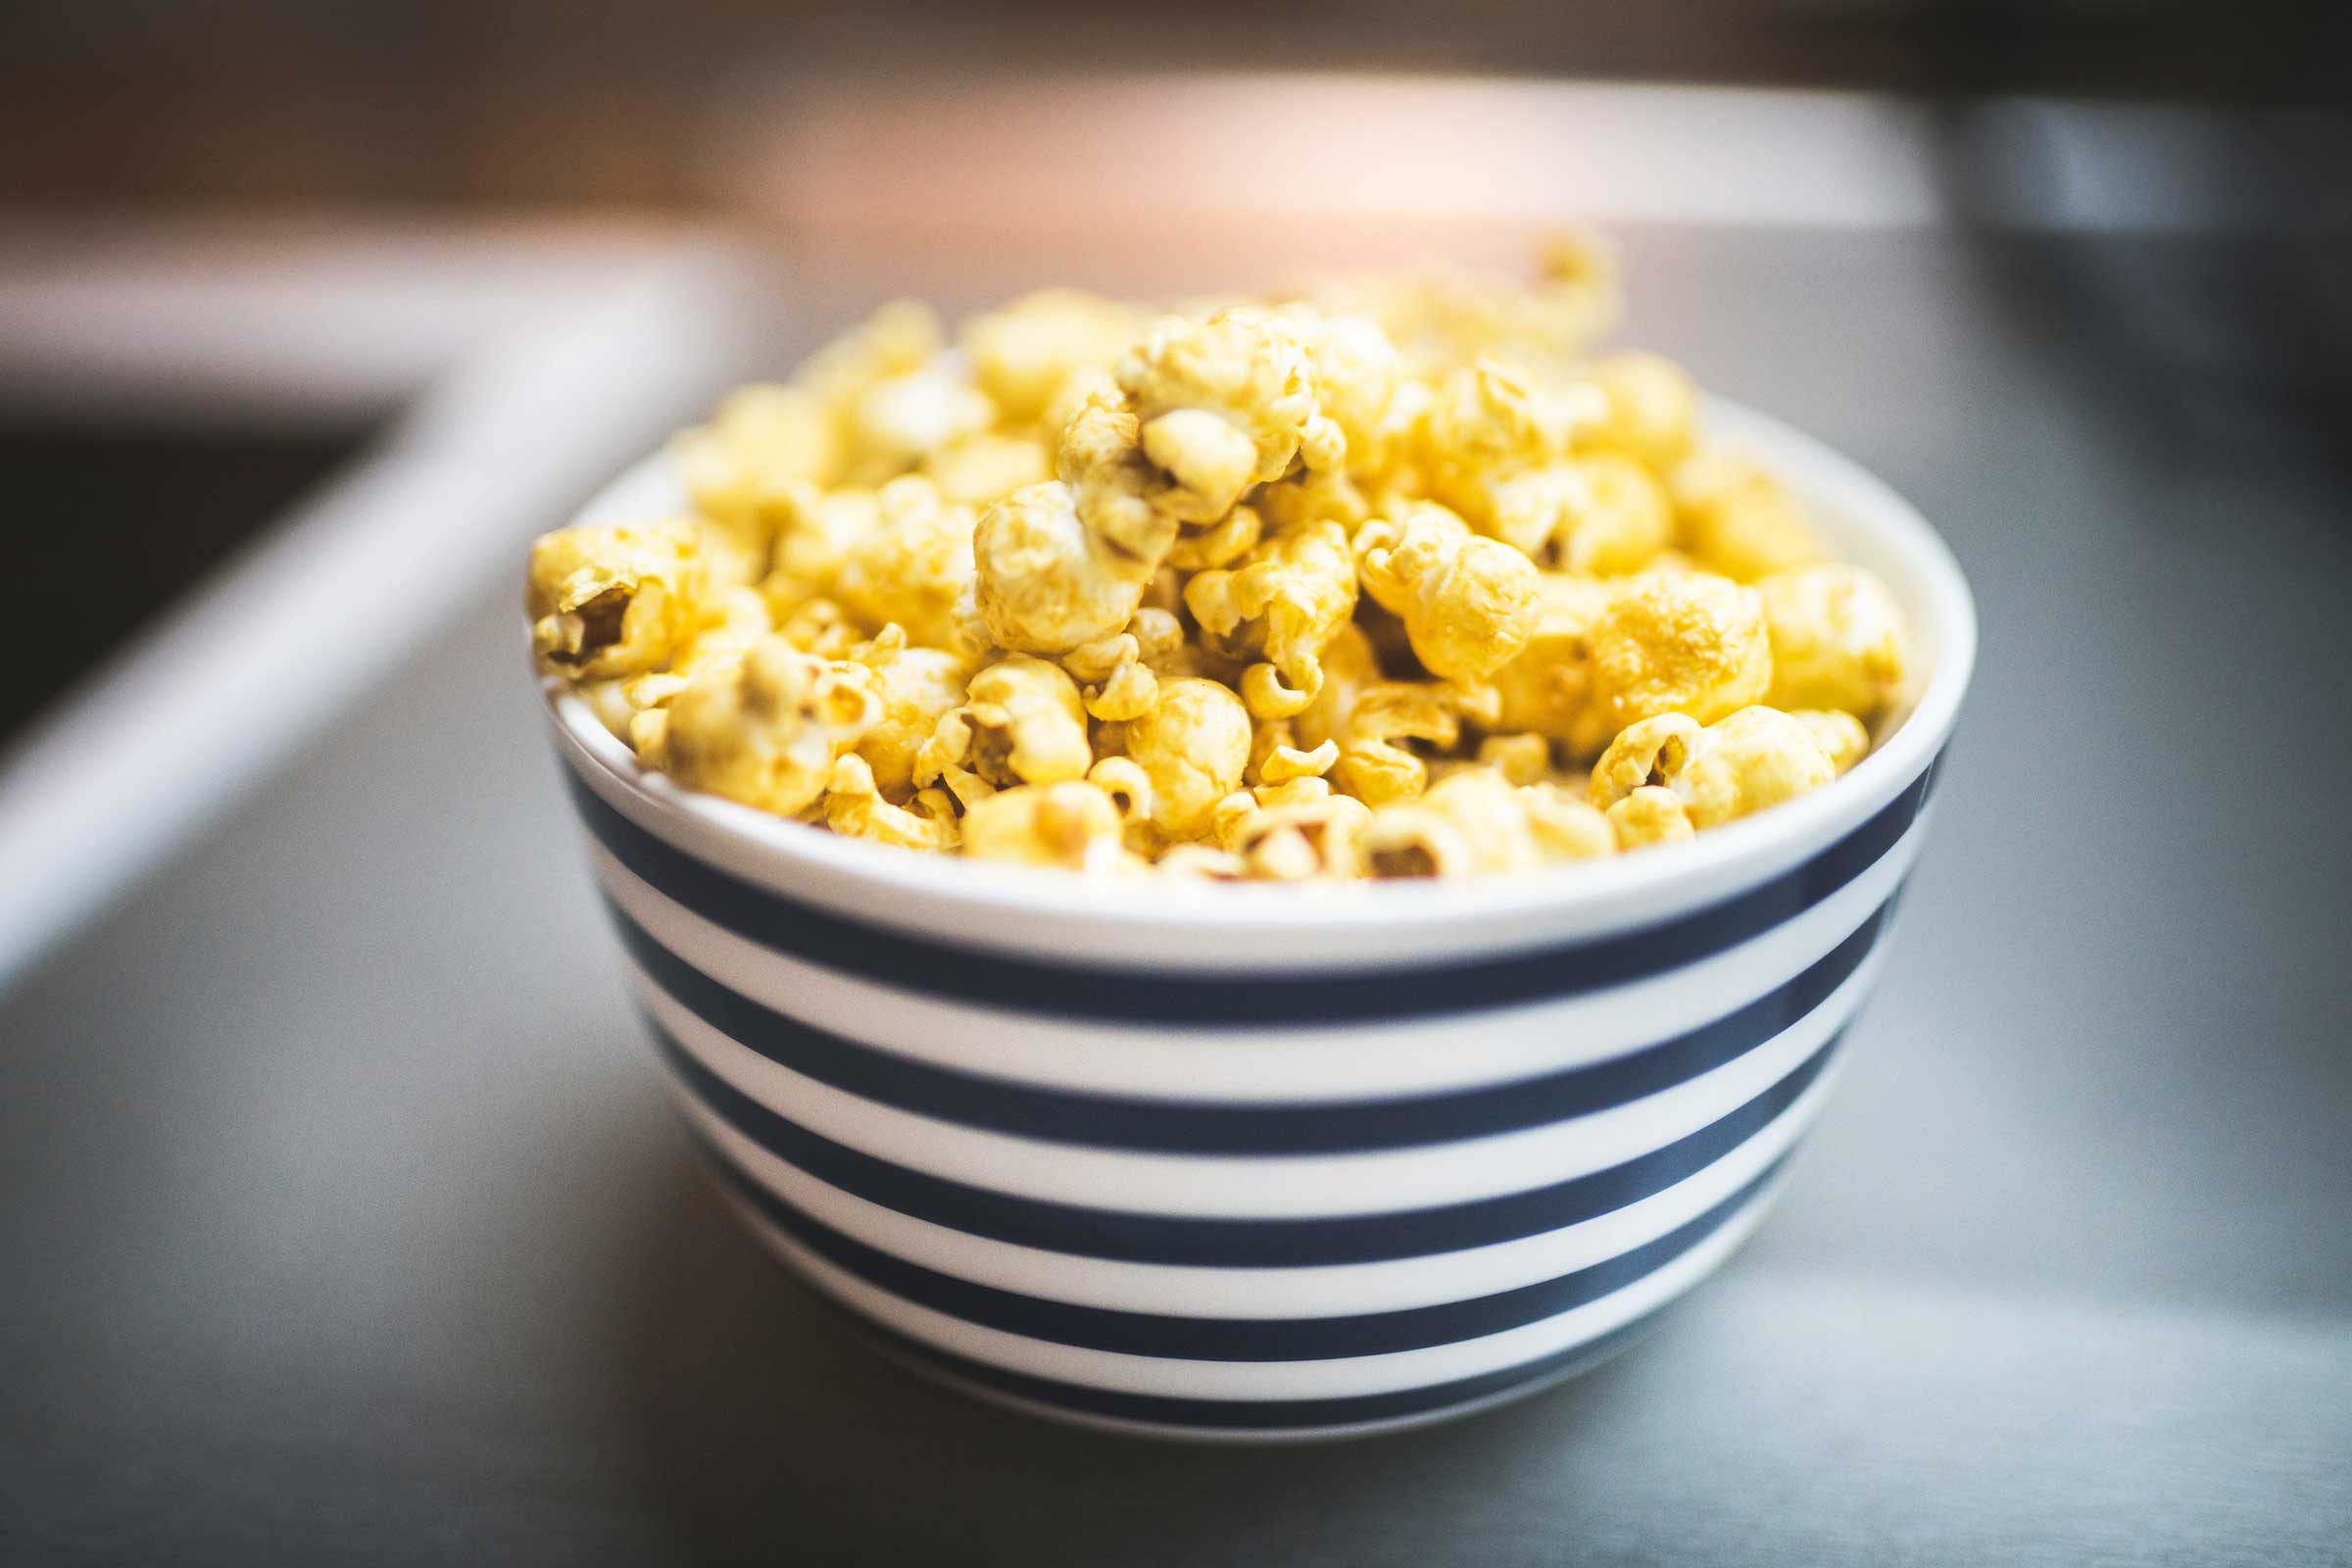 is-popcorn-healthy-here-are-top-reasons-to-eat-popcorn-the-healthy